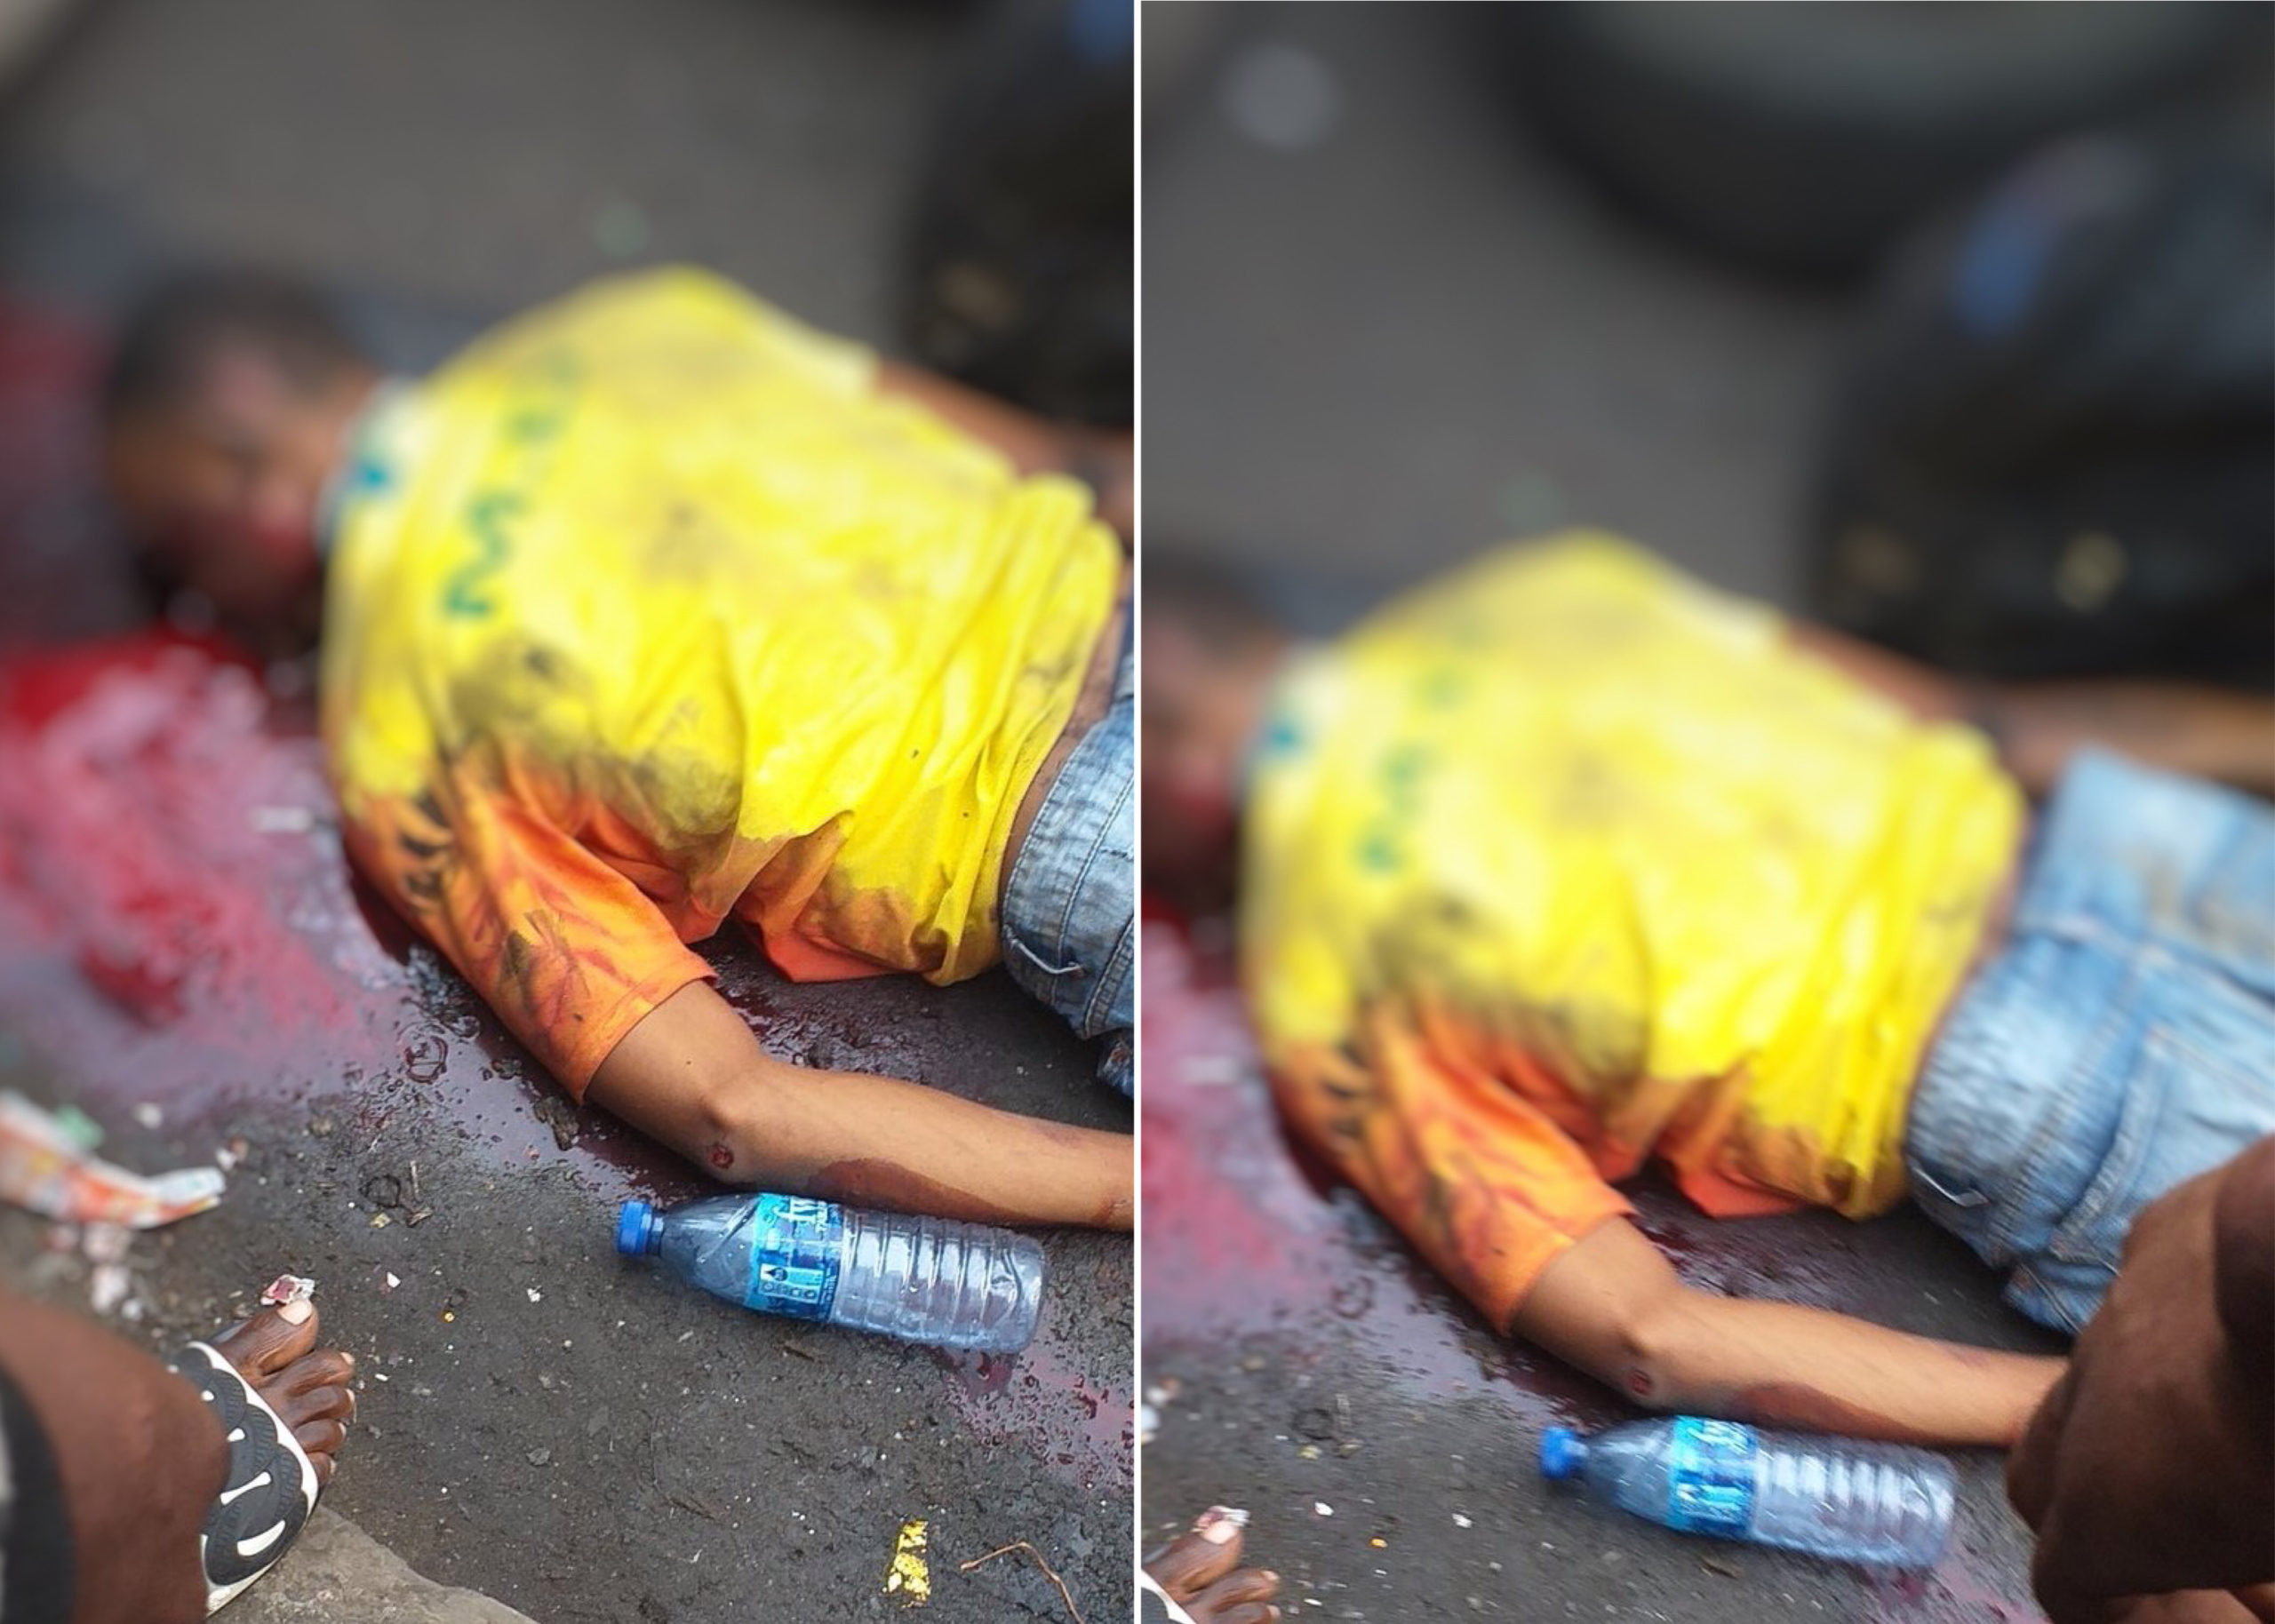 Man Accuses Lagos Task Force Of Crushing Cousin To Death While Chasing Bus Driver